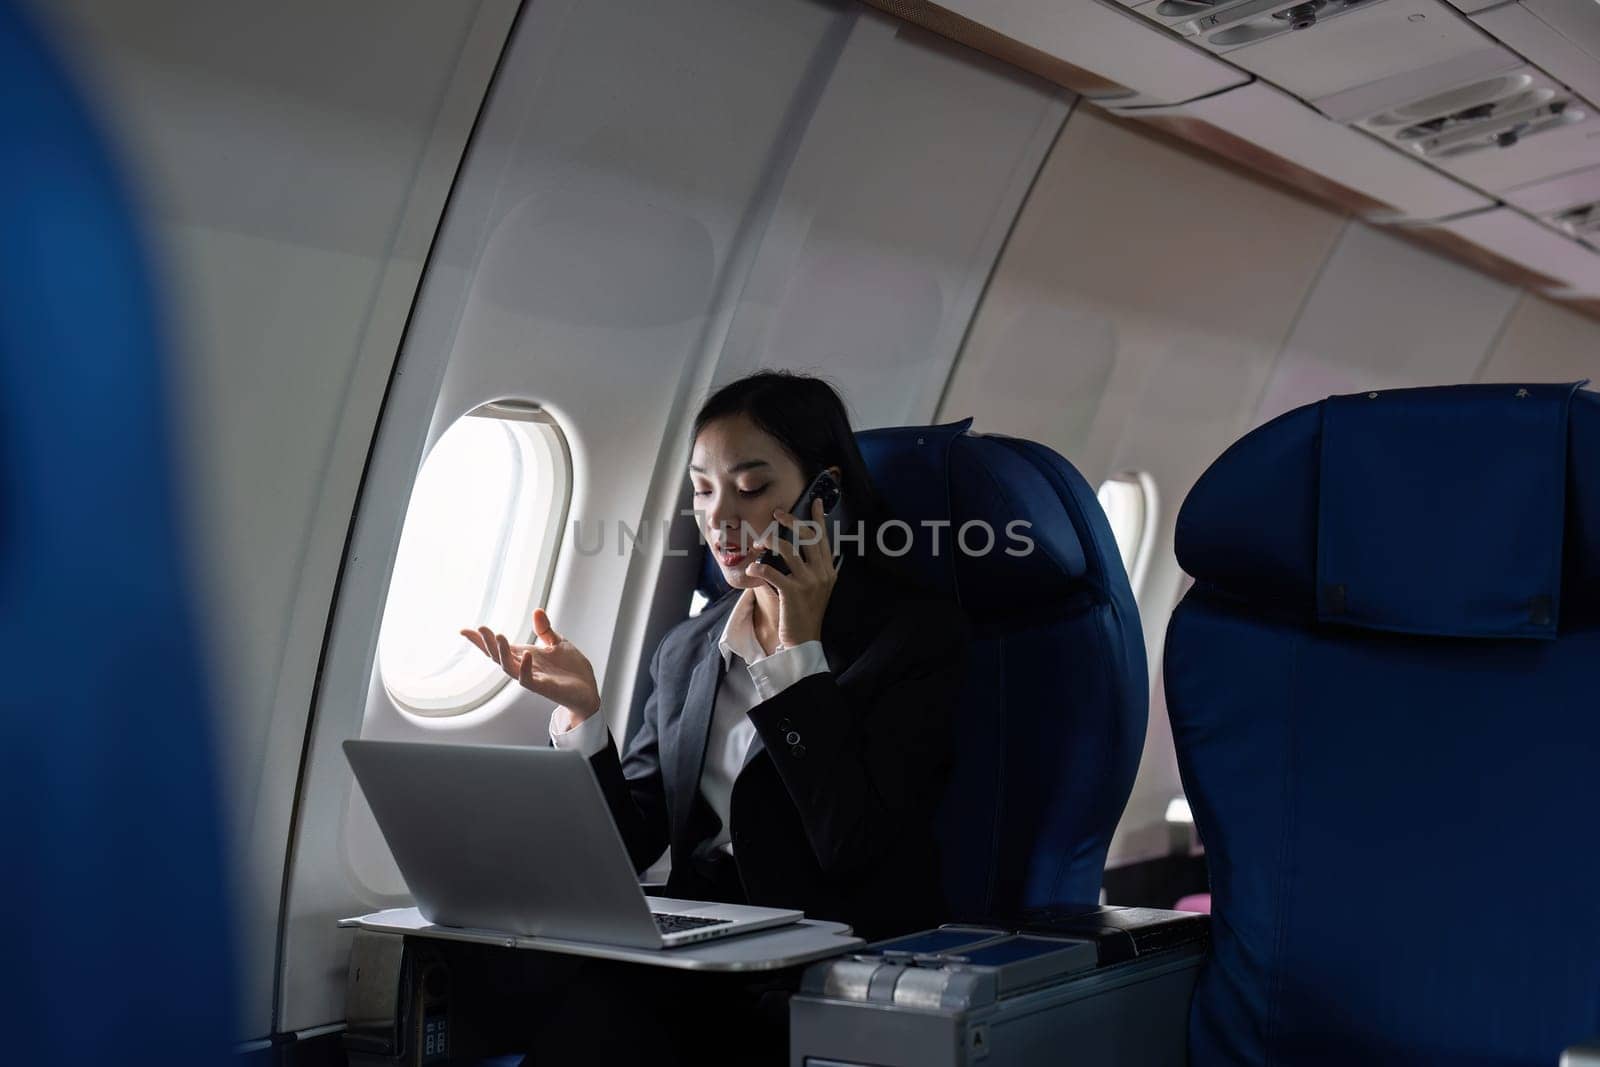 Beautiful Asian businesswoman working with laptop and mobile in aeroplane. working, travel, business concept.